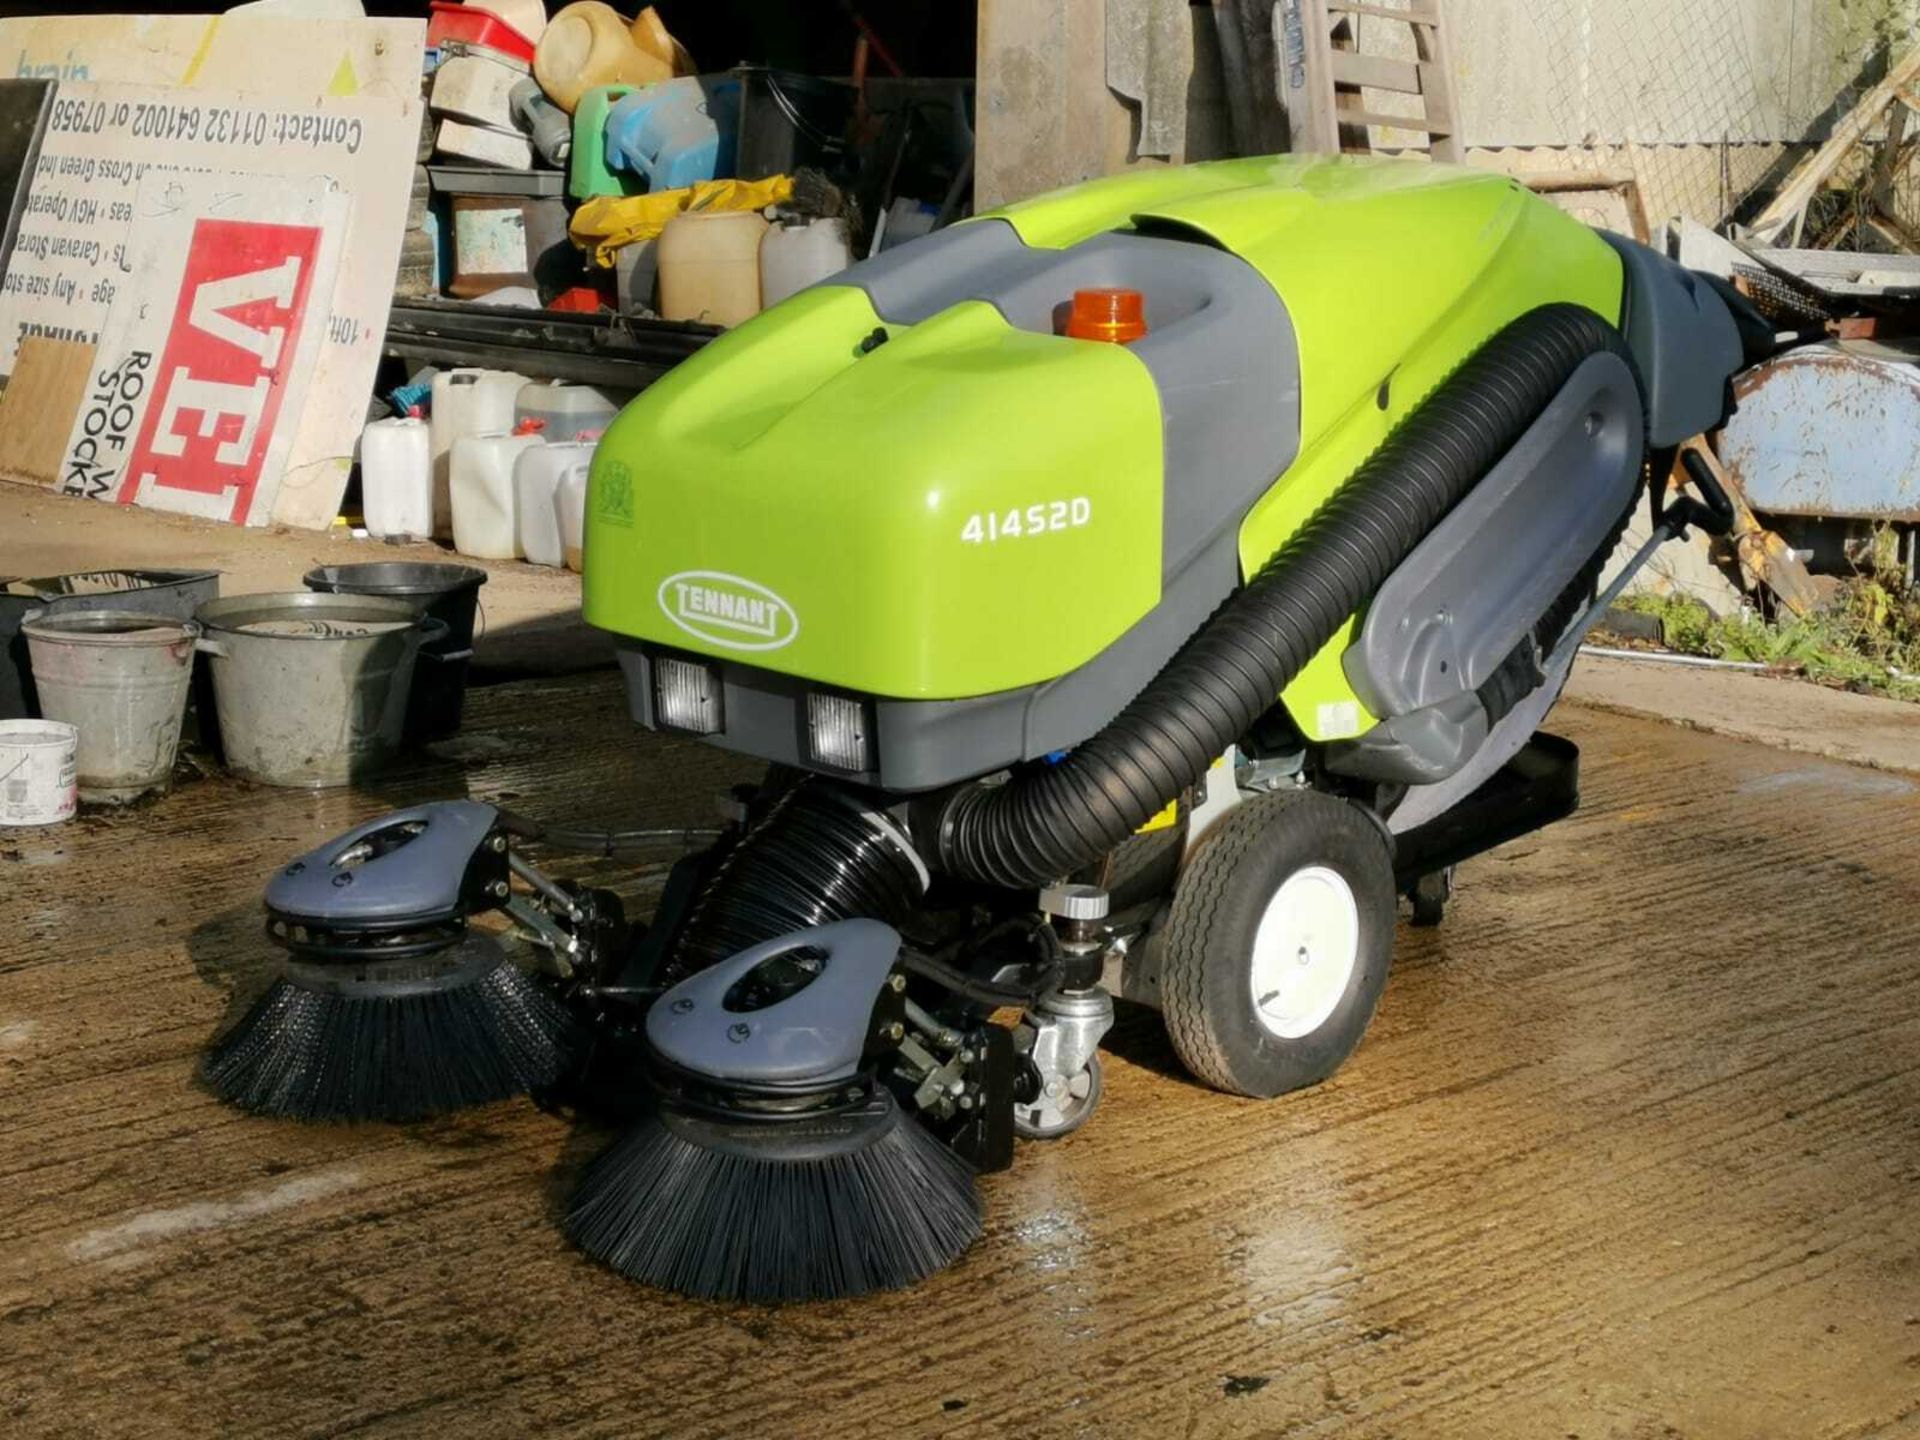 TENNANT GREEN MACHINE MODEL: 414S2D PEDESTRIAN SWEEPER, ONLY 243 HOURS, YEAR 11/2013 *PLUS VAT* - Image 10 of 11